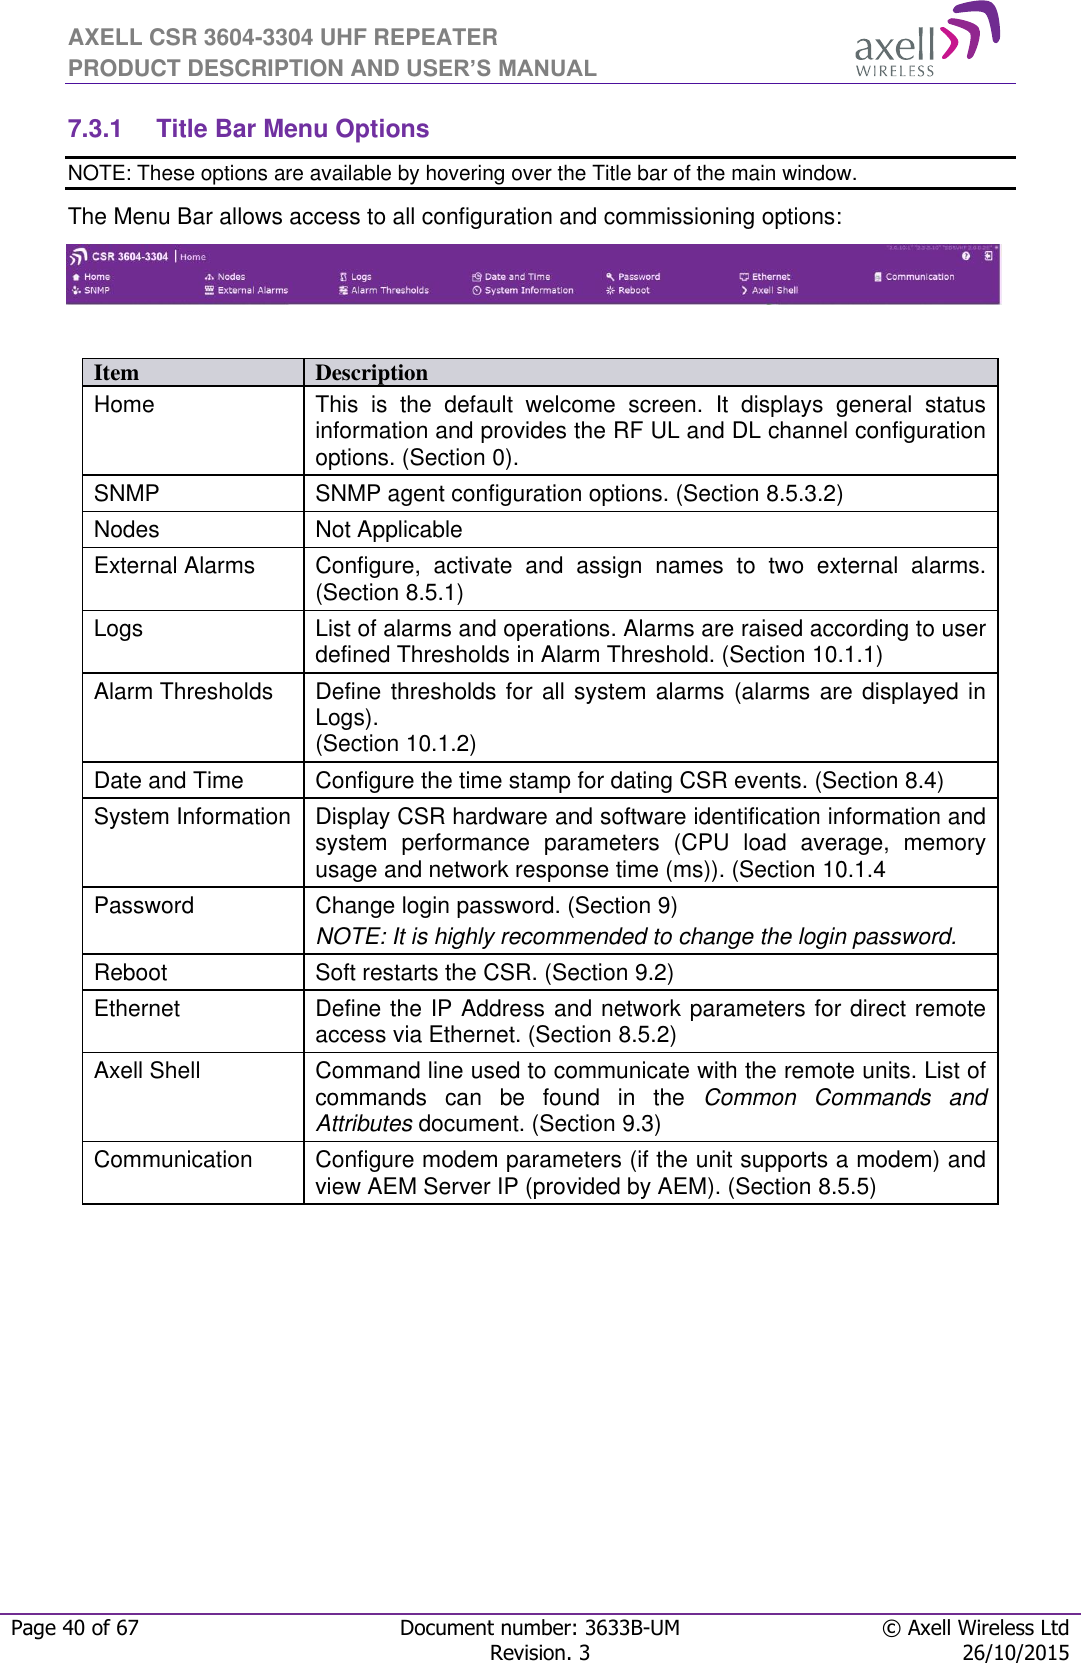 AXELL CSR 3604-3304 UHF REPEATER PRODUCT DESCRIPTION AND USER’S MANUAL  Page 40 of 67 Document number: 3633B-UM © Axell Wireless Ltd  Revision. 3 26/10/2015  7.3.1  Title Bar Menu Options NOTE: These options are available by hovering over the Title bar of the main window. The Menu Bar allows access to all configuration and commissioning options:           Item Description Home This  is  the  default  welcome  screen.  It  displays  general  status information and provides the RF UL and DL channel configuration options. (Section 0). SNMP SNMP agent configuration options. (Section 8.5.3.2) Nodes Not Applicable External Alarms Configure,  activate  and  assign  names  to  two  external  alarms. (Section 8.5.1) Logs List of alarms and operations. Alarms are raised according to user defined Thresholds in Alarm Threshold. (Section 10.1.1) Alarm Thresholds Define thresholds for all system alarms (alarms are displayed in Logs). (Section 10.1.2) Date and Time Configure the time stamp for dating CSR events. (Section 8.4) System Information Display CSR hardware and software identification information and system  performance  parameters  (CPU  load  average,  memory usage and network response time (ms)). (Section 10.1.4 Password Change login password. (Section 9) NOTE: It is highly recommended to change the login password. Reboot Soft restarts the CSR. (Section 9.2) Ethernet Define the IP Address and network parameters for direct remote access via Ethernet. (Section 8.5.2) Axell Shell Command line used to communicate with the remote units. List of commands  can  be  found  in  the  Common  Commands  and Attributes document. (Section 9.3) Communication Configure modem parameters (if the unit supports a modem) and view AEM Server IP (provided by AEM). (Section 8.5.5) 